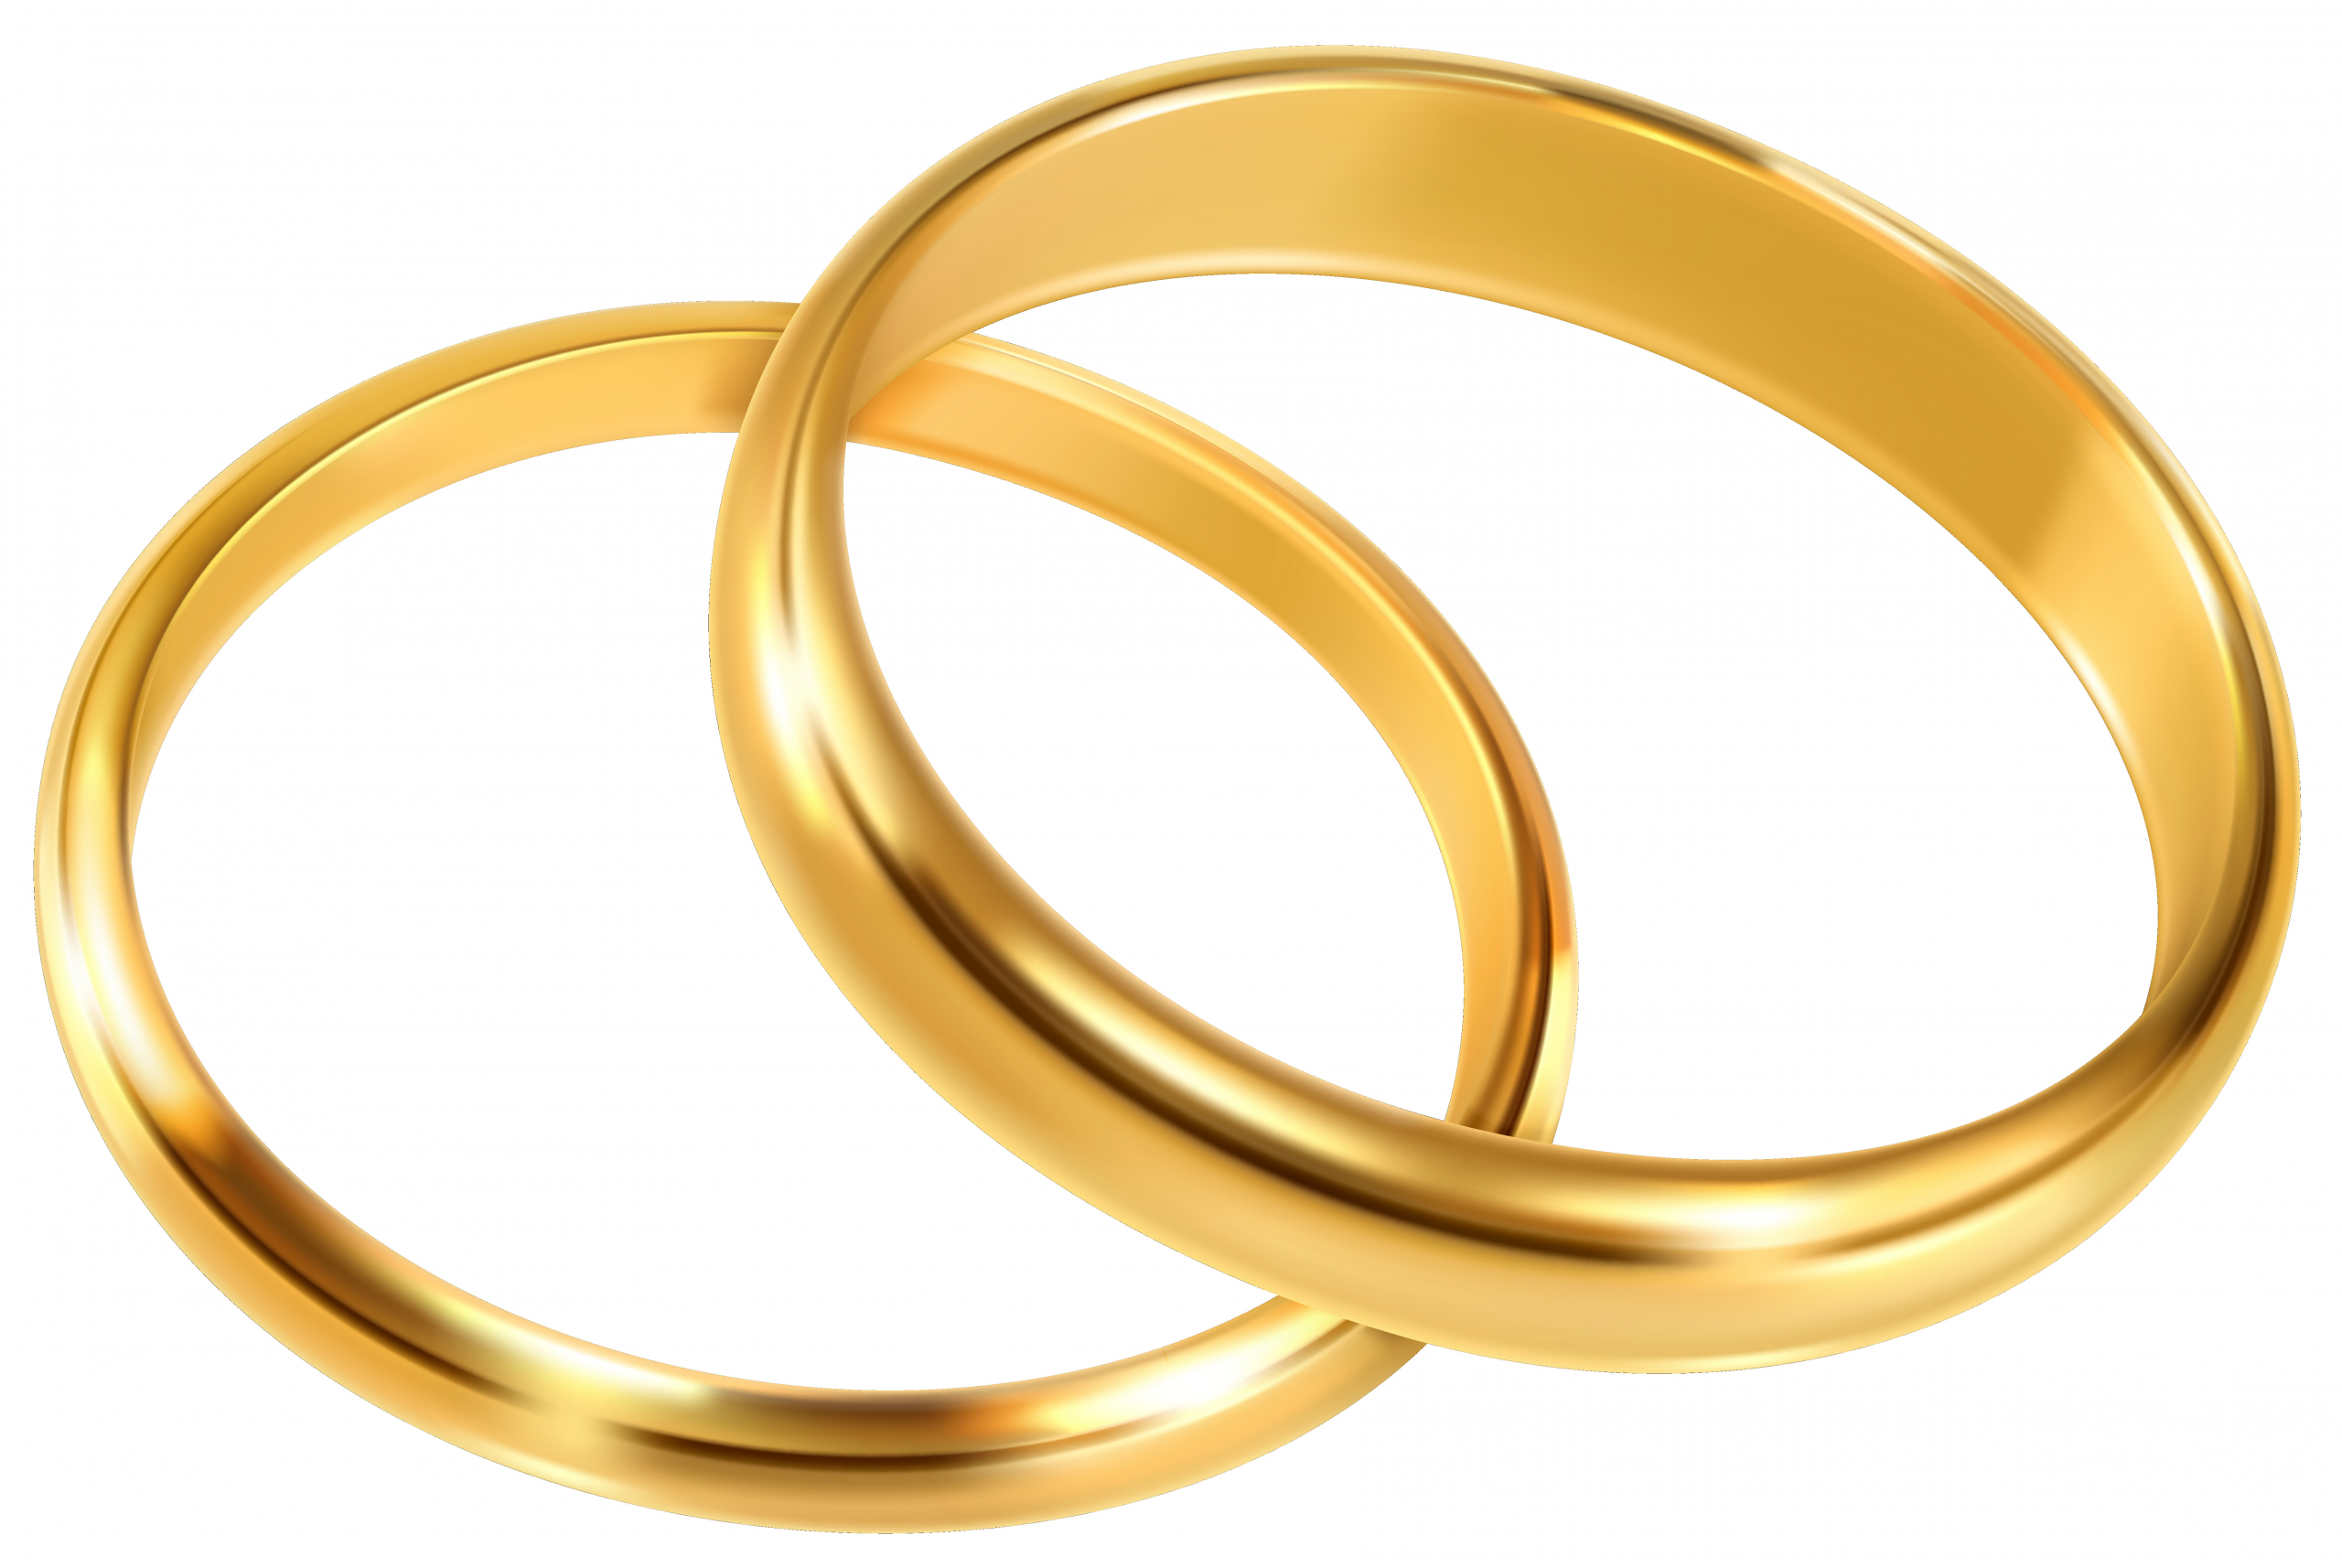 Wedding Rings Clip Art
 The best free Wedding clipart images Download from 983